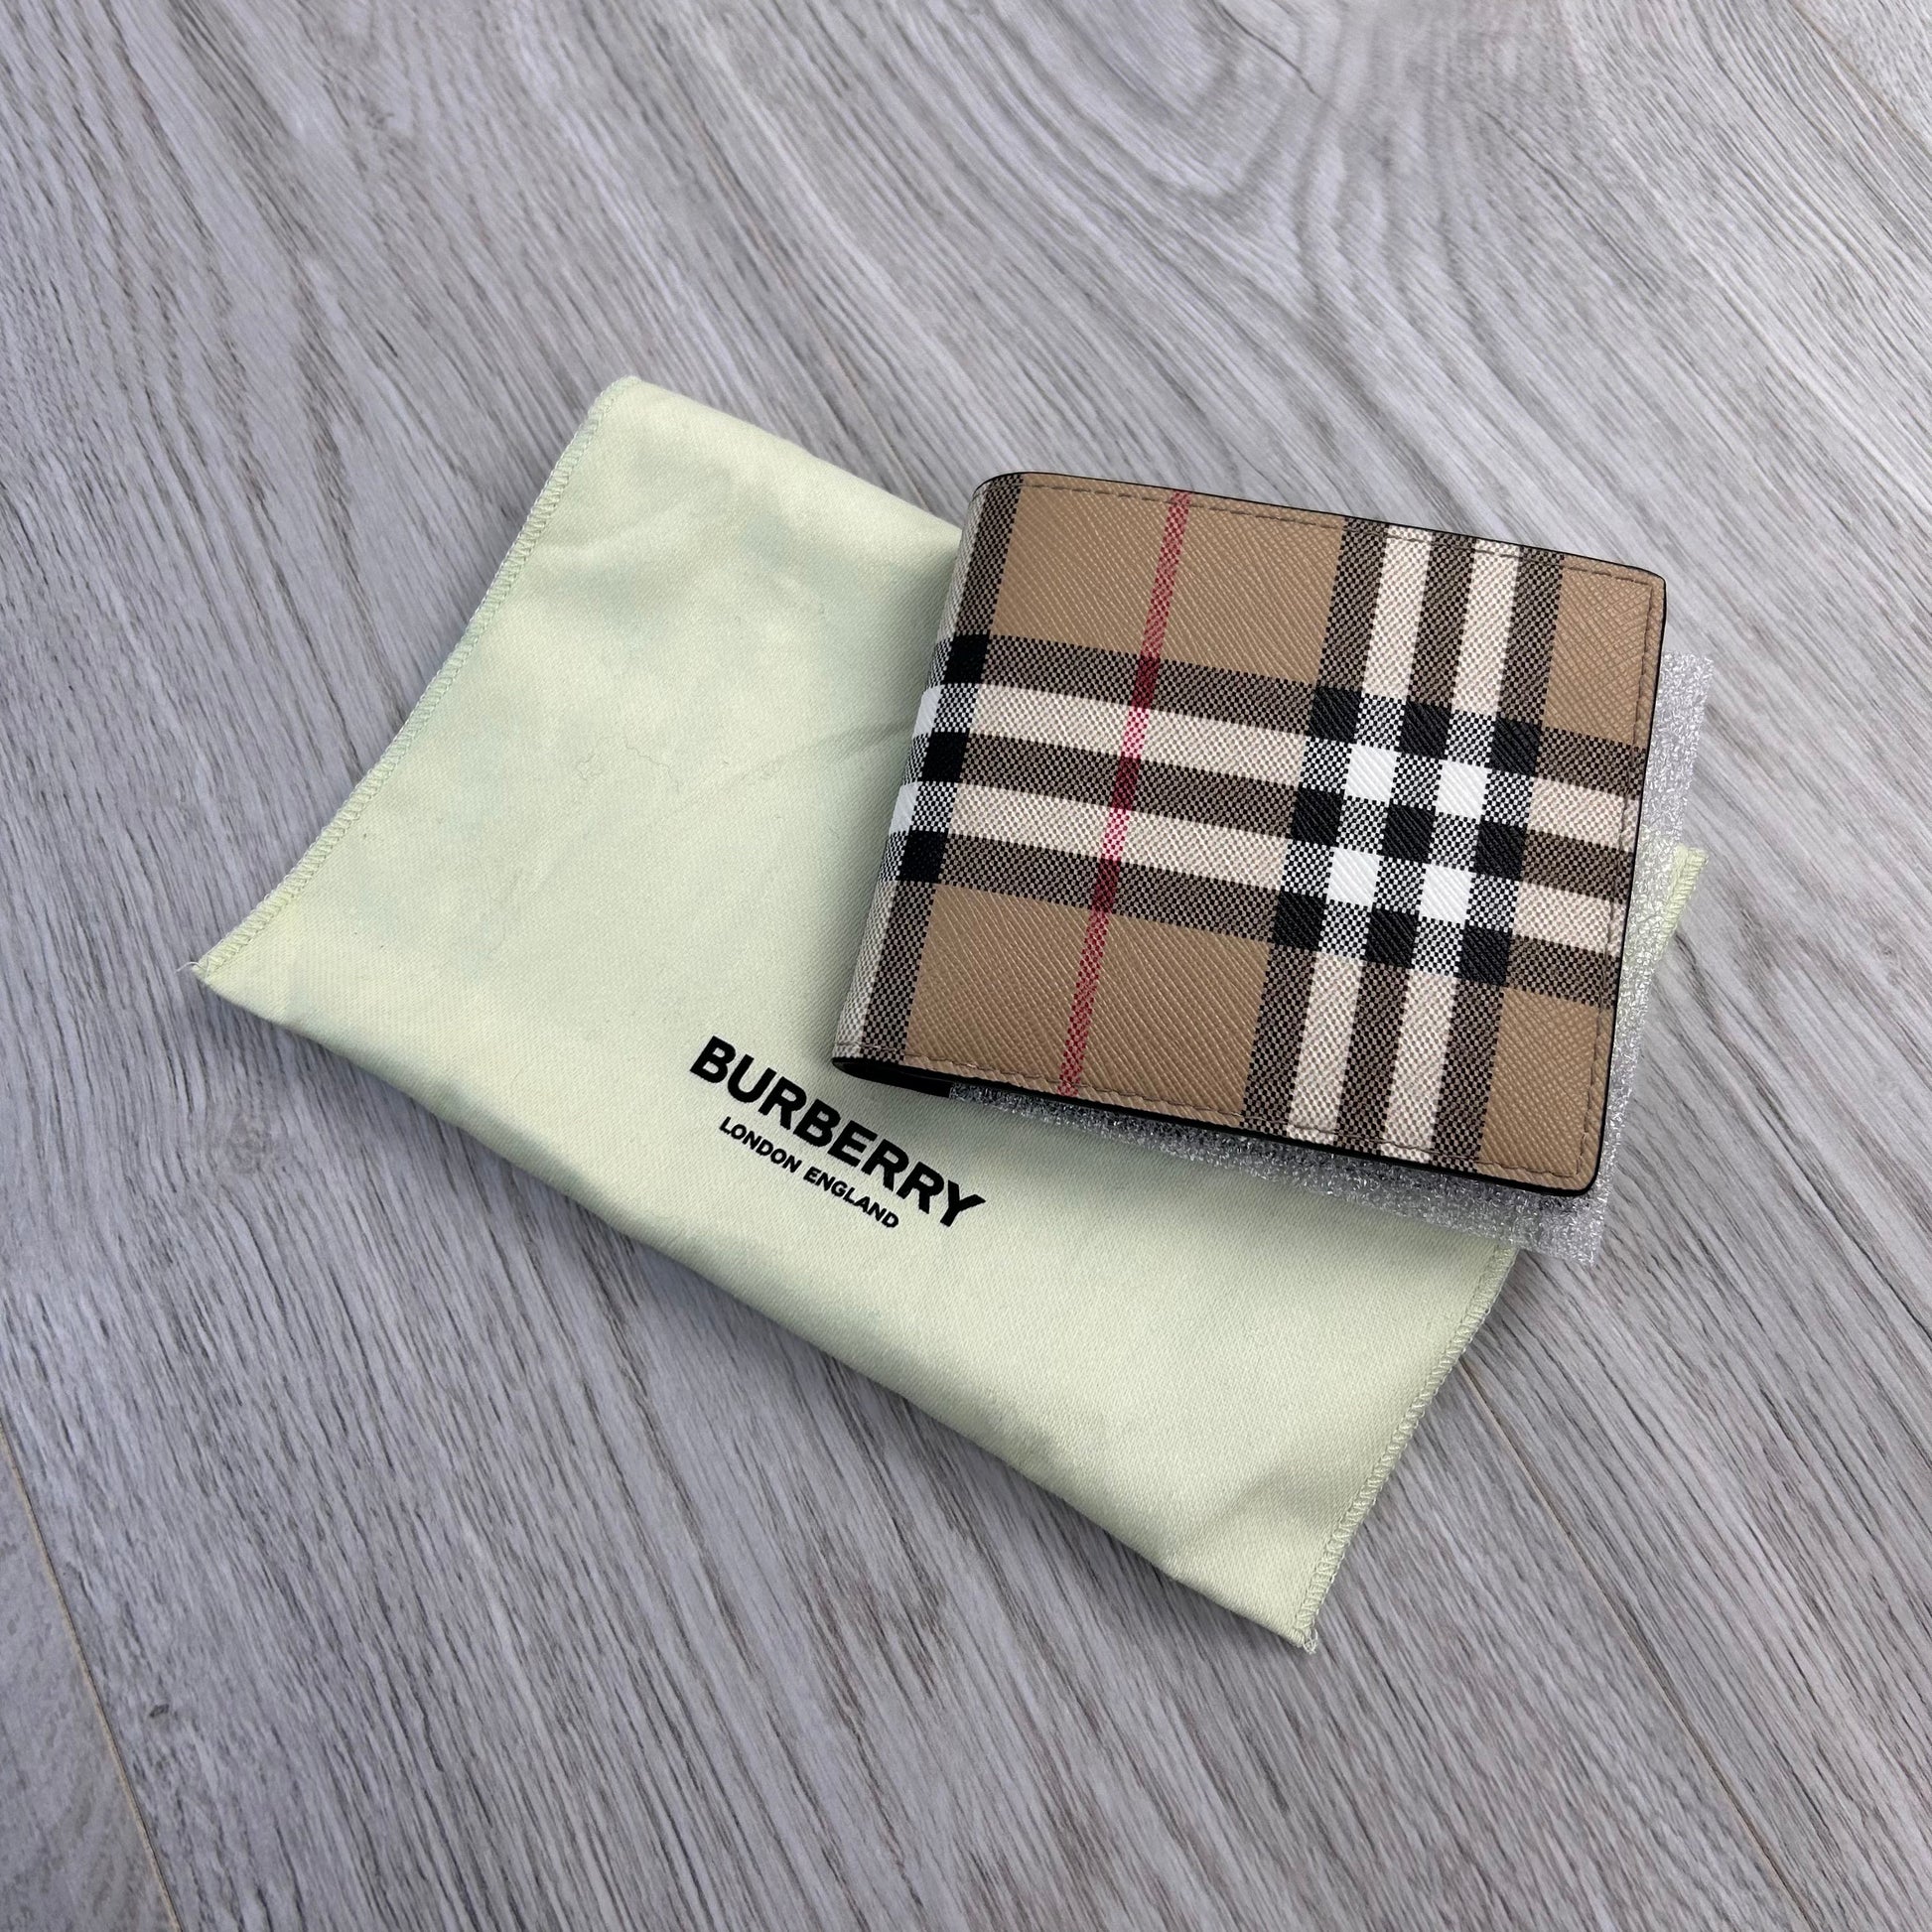 Burberry Exaggerated Check Slim Bifold Wallet